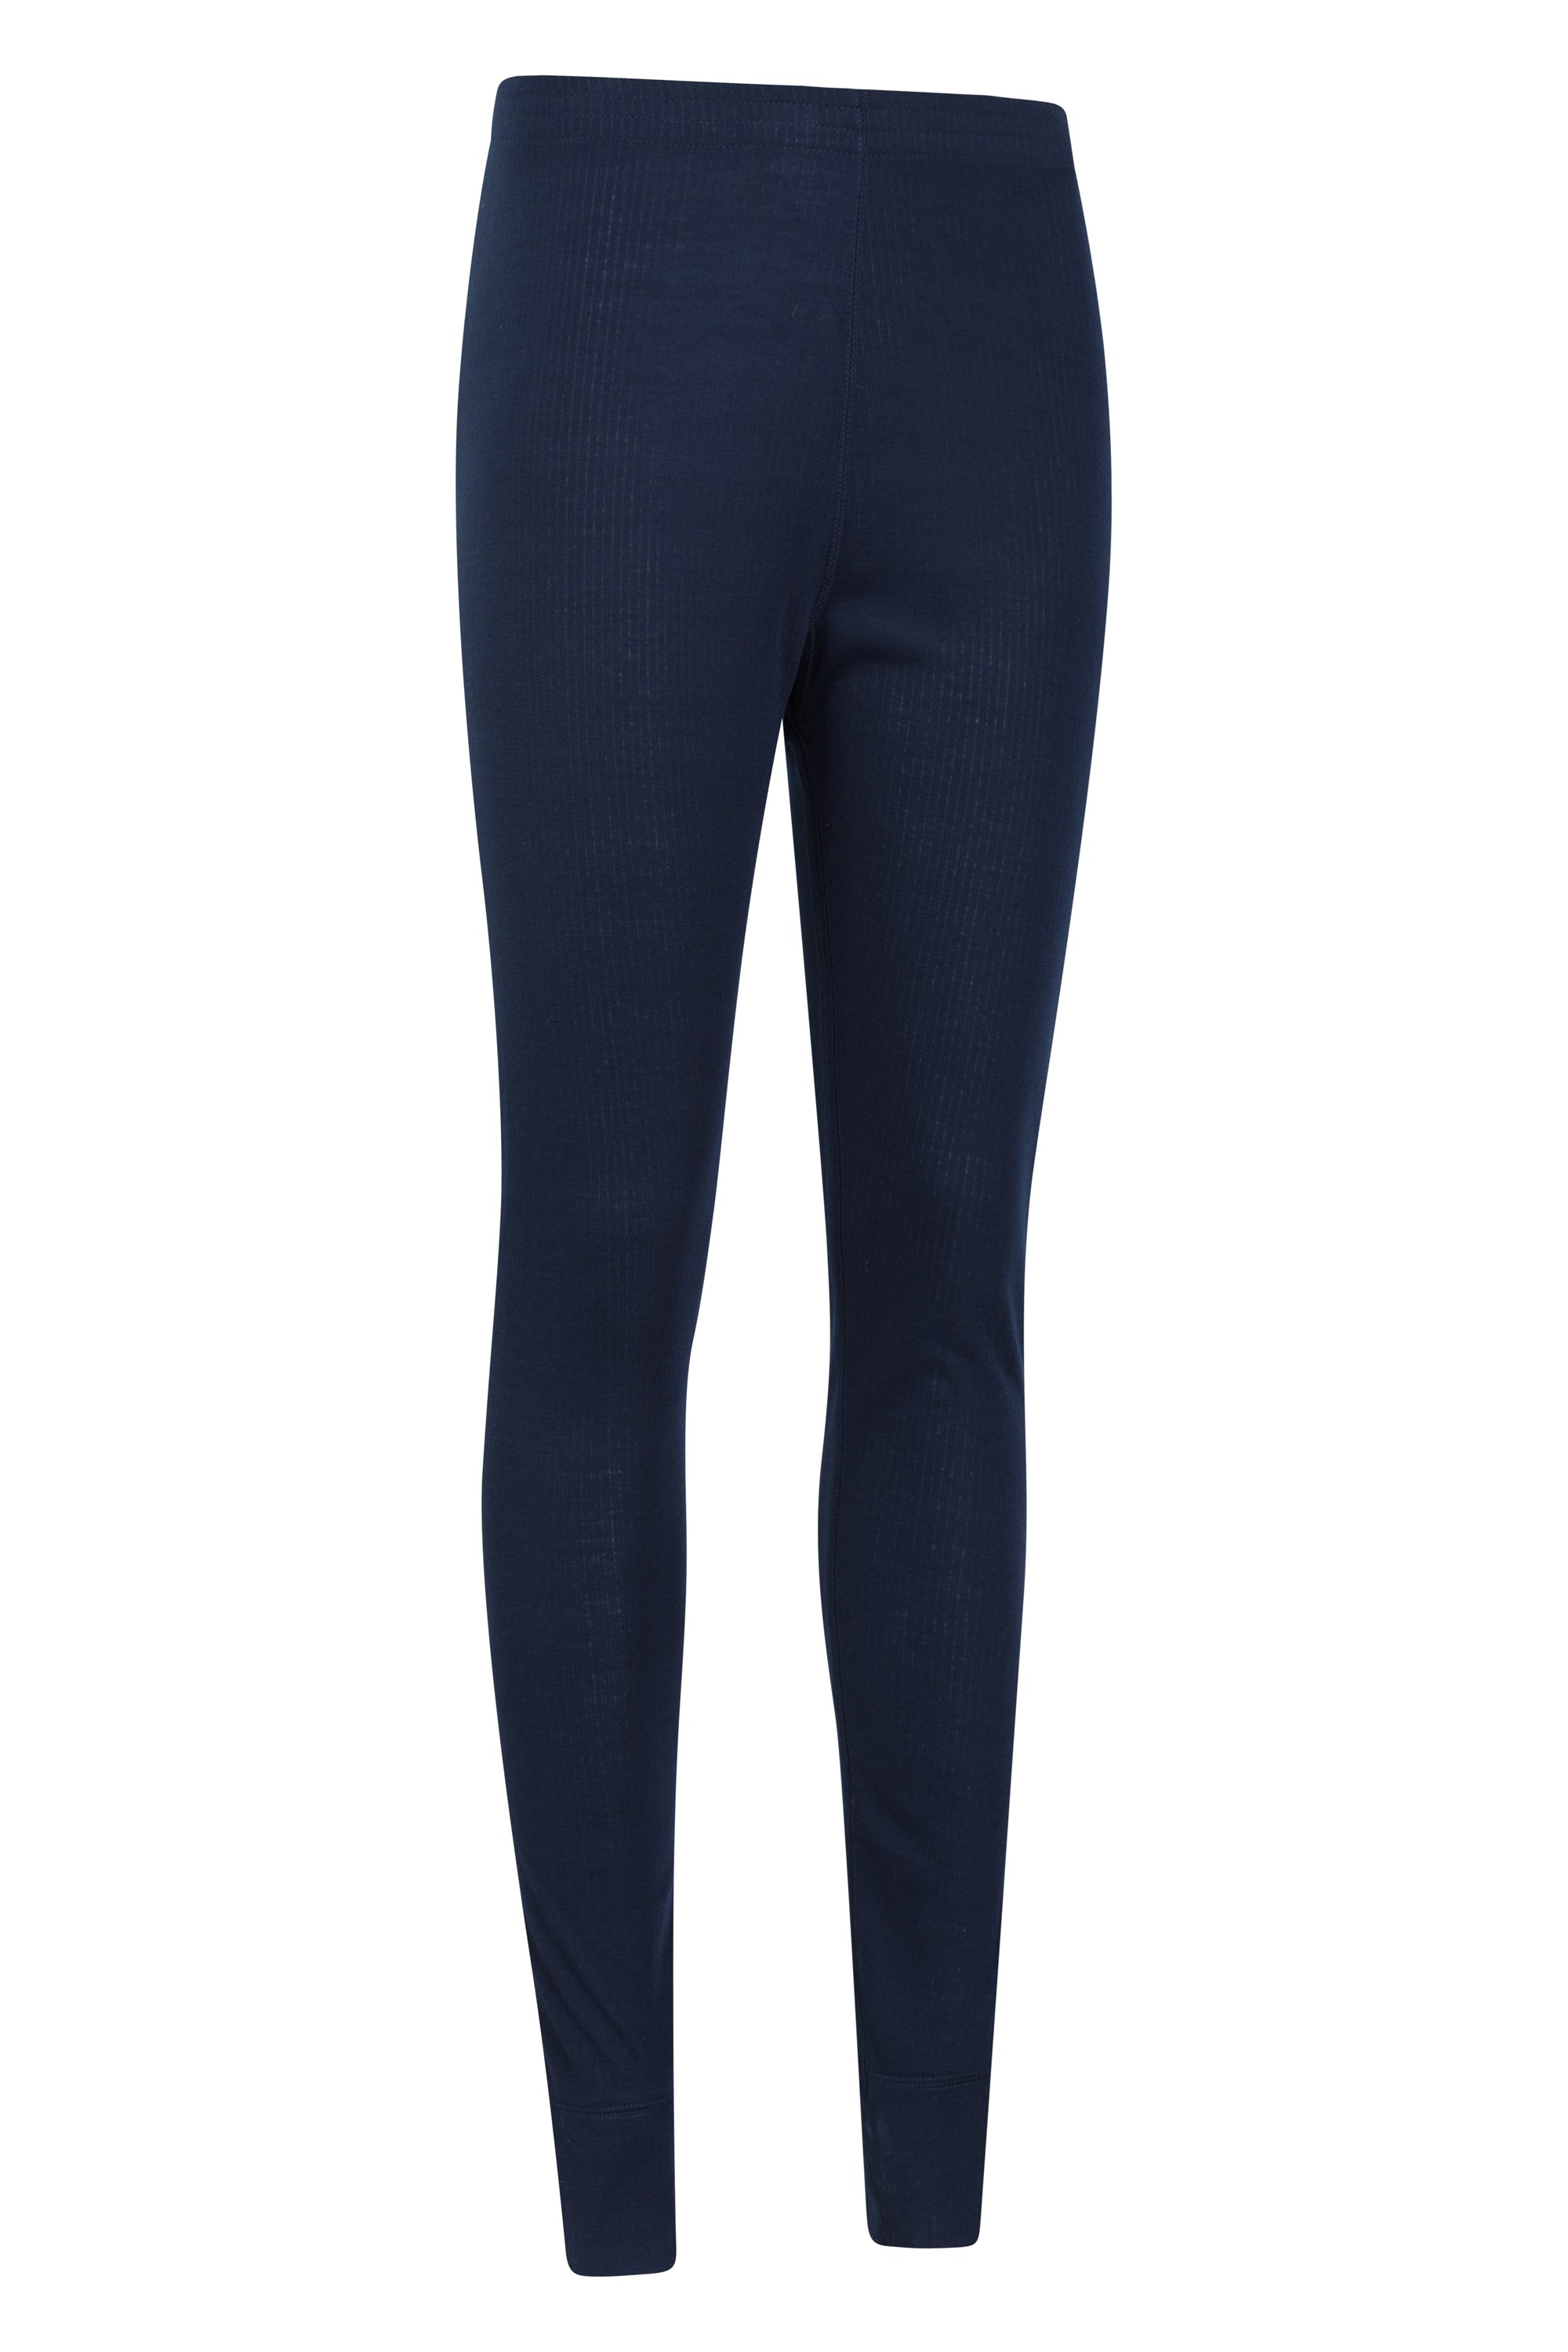 VIIHON Fleece Lined Thermal Tights | High Waisted Opaque Leggings for Women